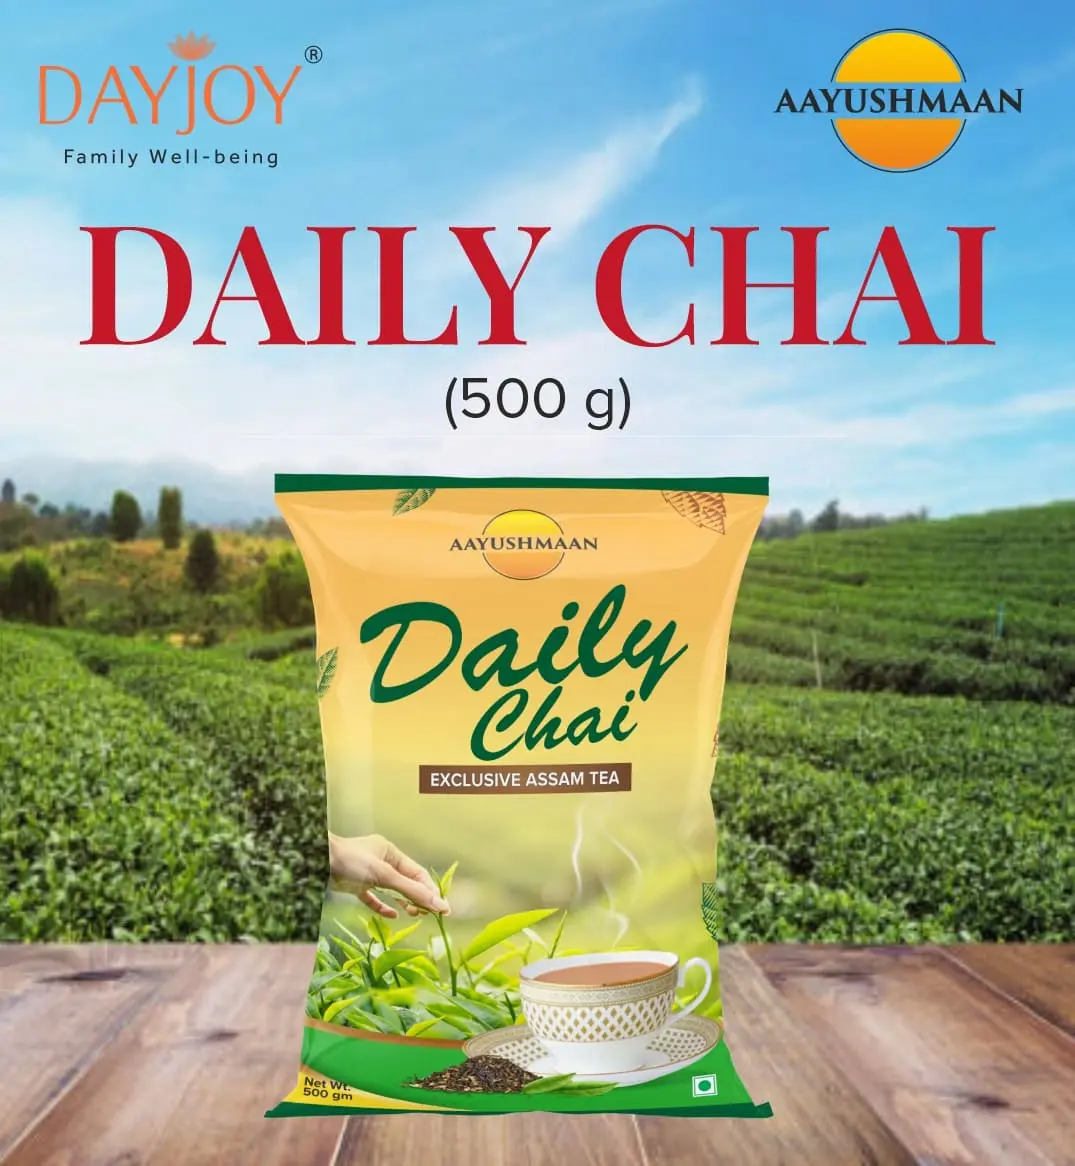 Daily Tea- made of natural tea leaves